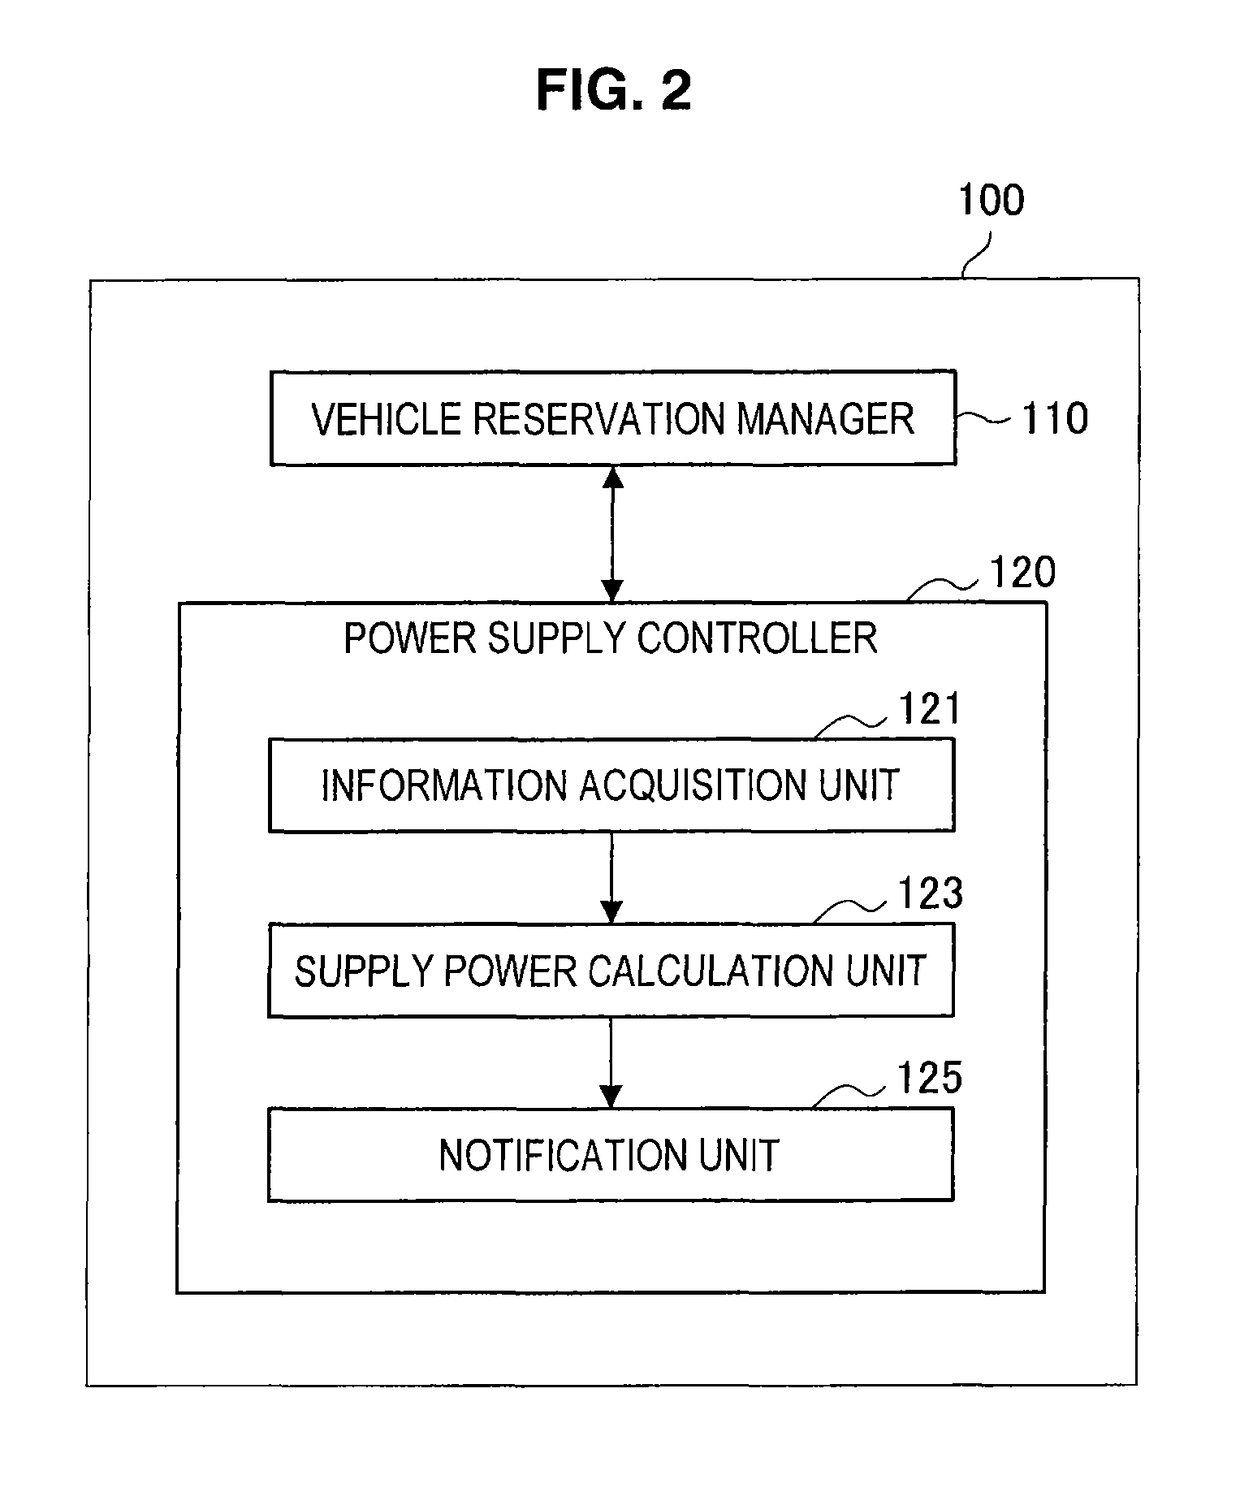 Determining power to be supplied based on reservation information of a vehicle